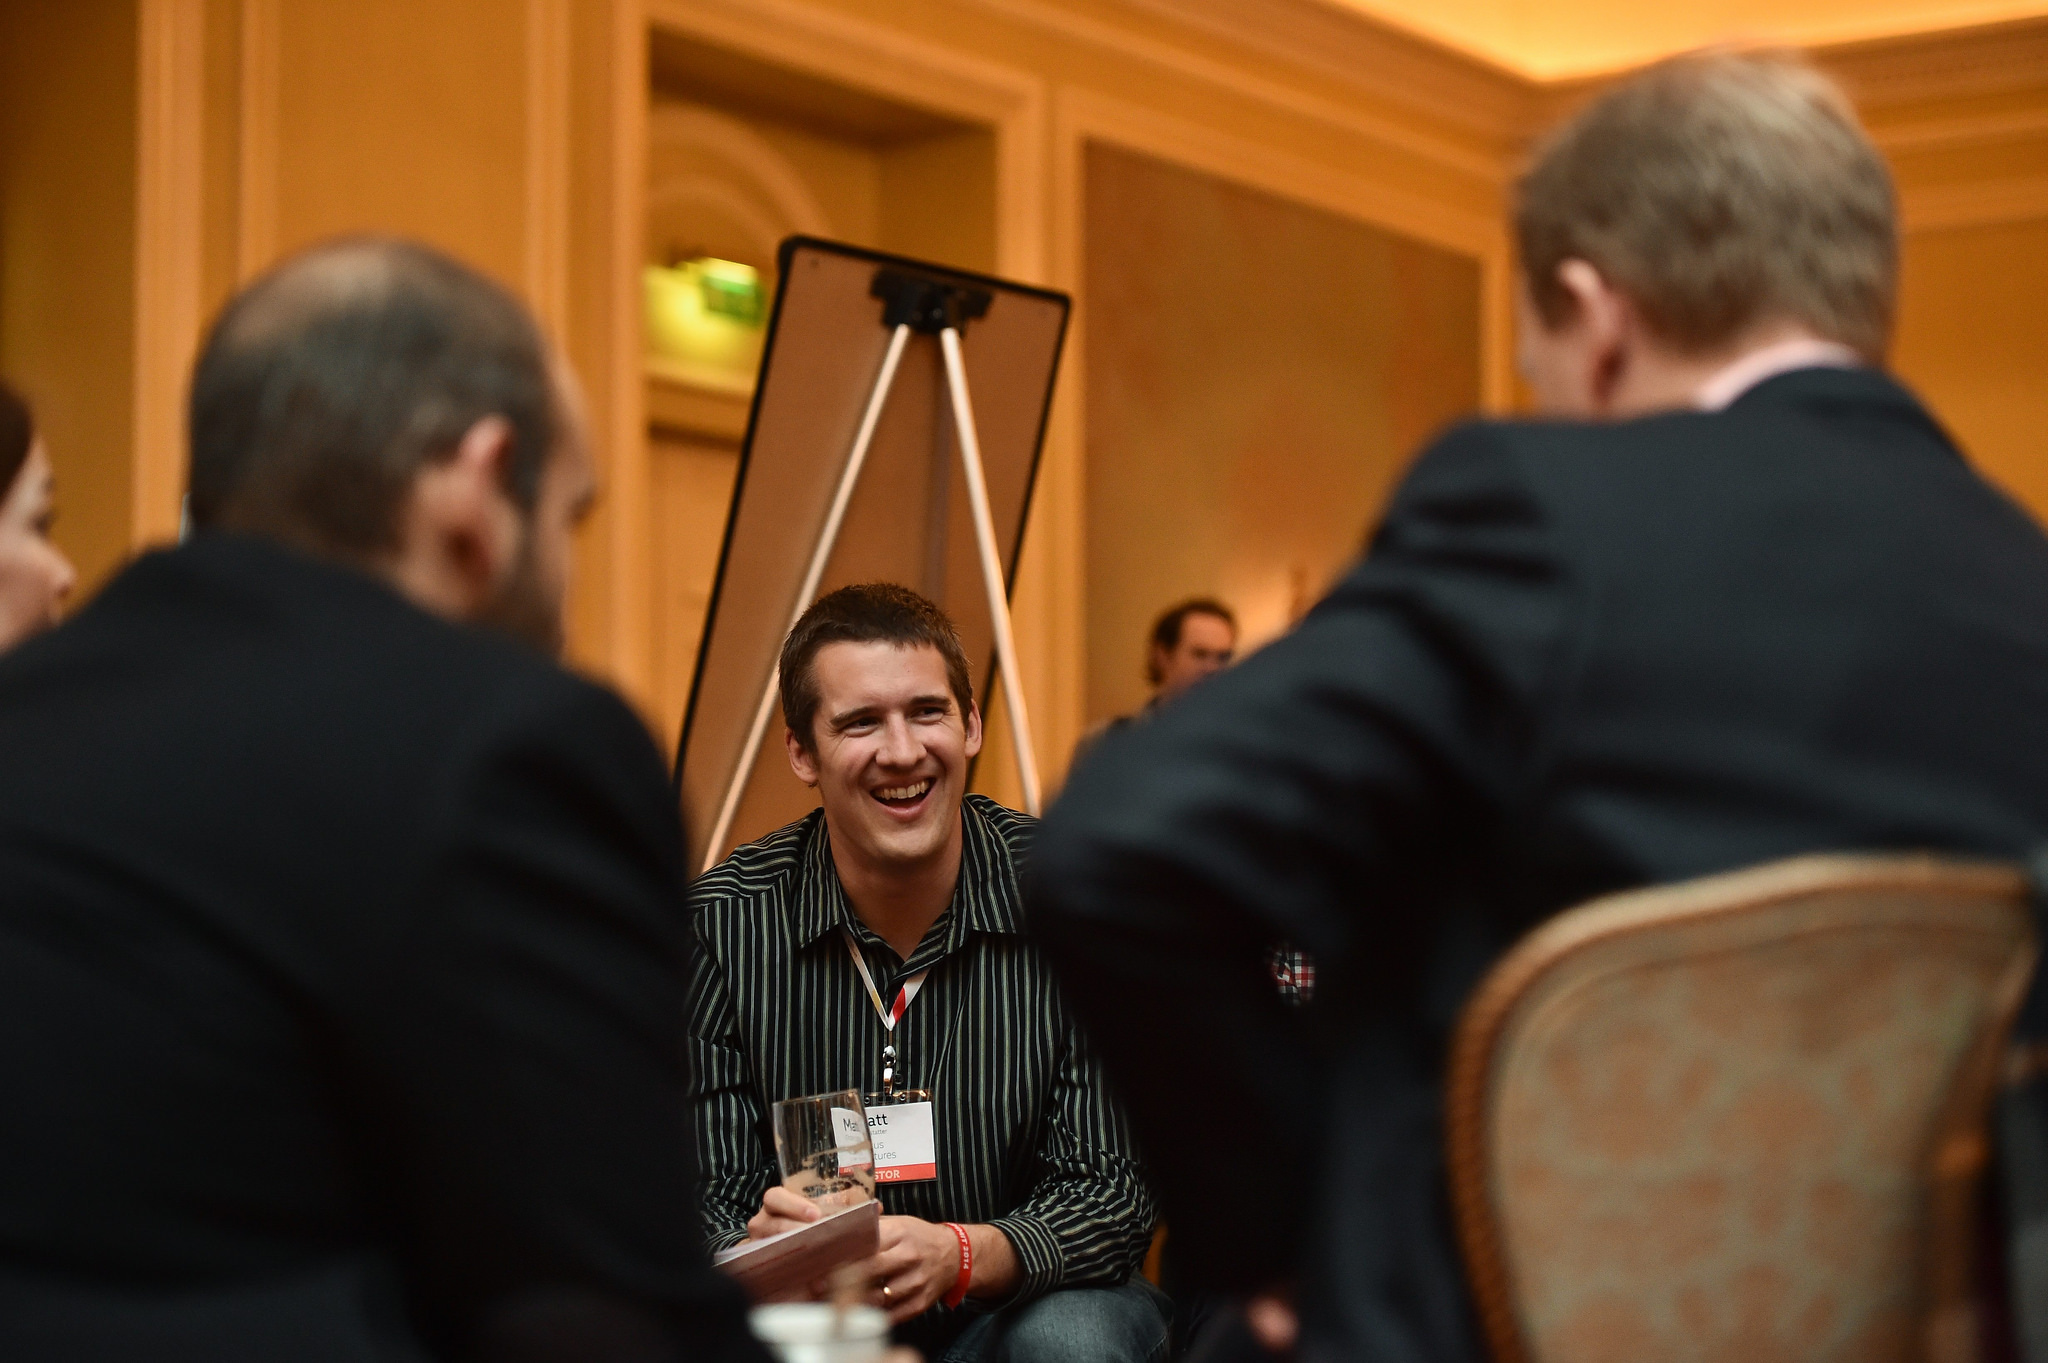 Business networking hacks at a conference: tips&tricks from Web Summit